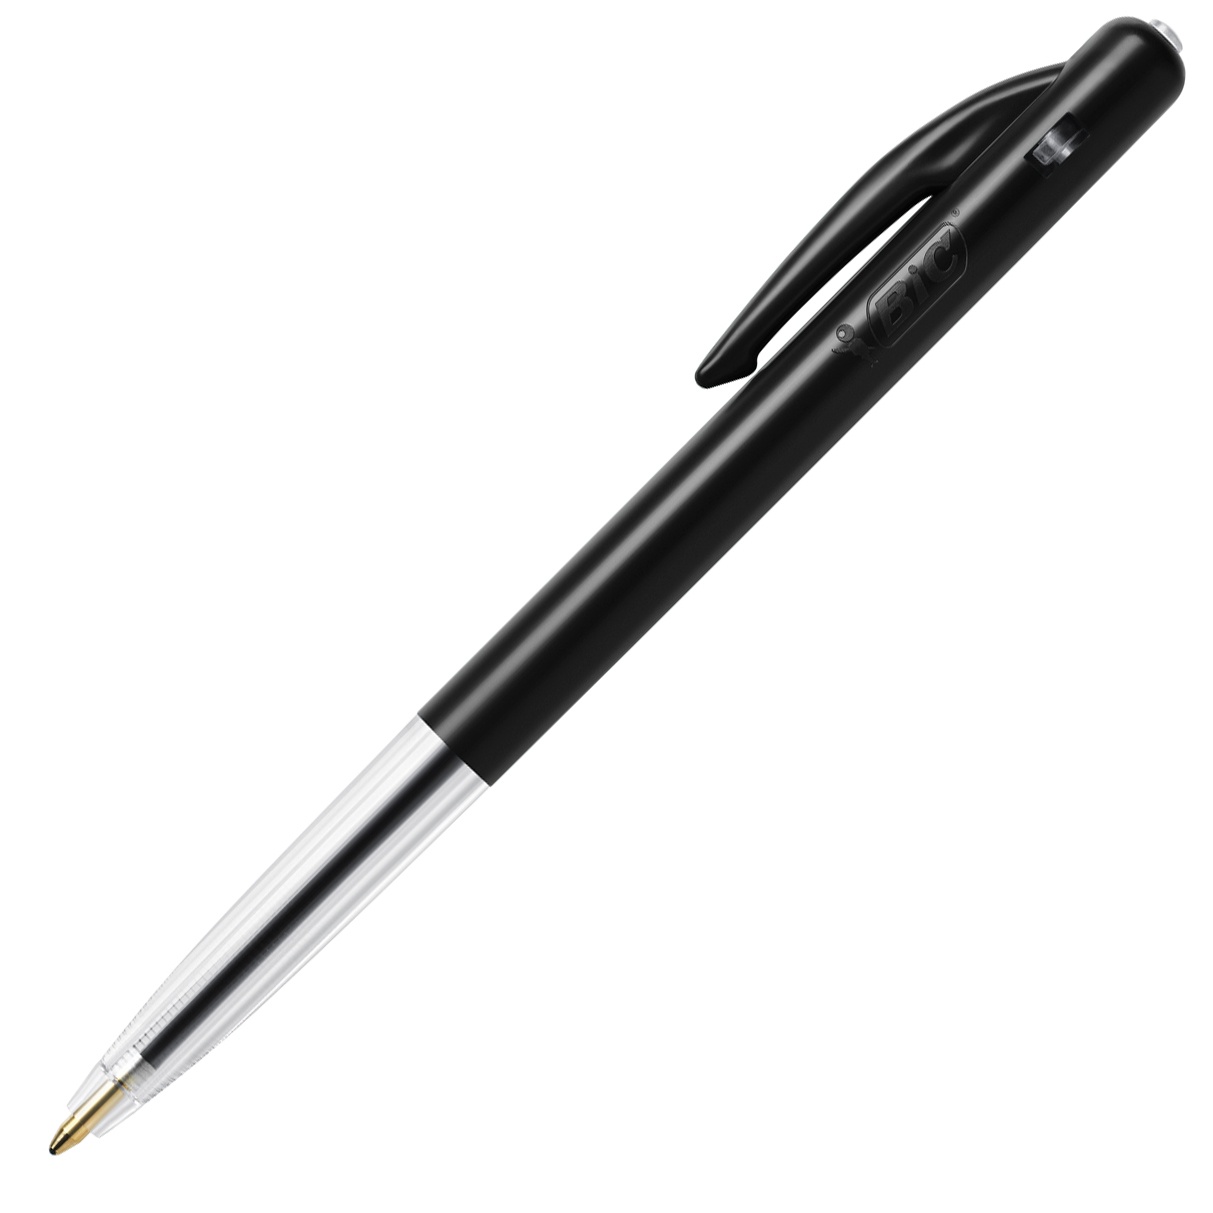 M10 Original Ballpoint Pen in the group Pens / Writing / Ballpoints at Pen Store (100215_r)